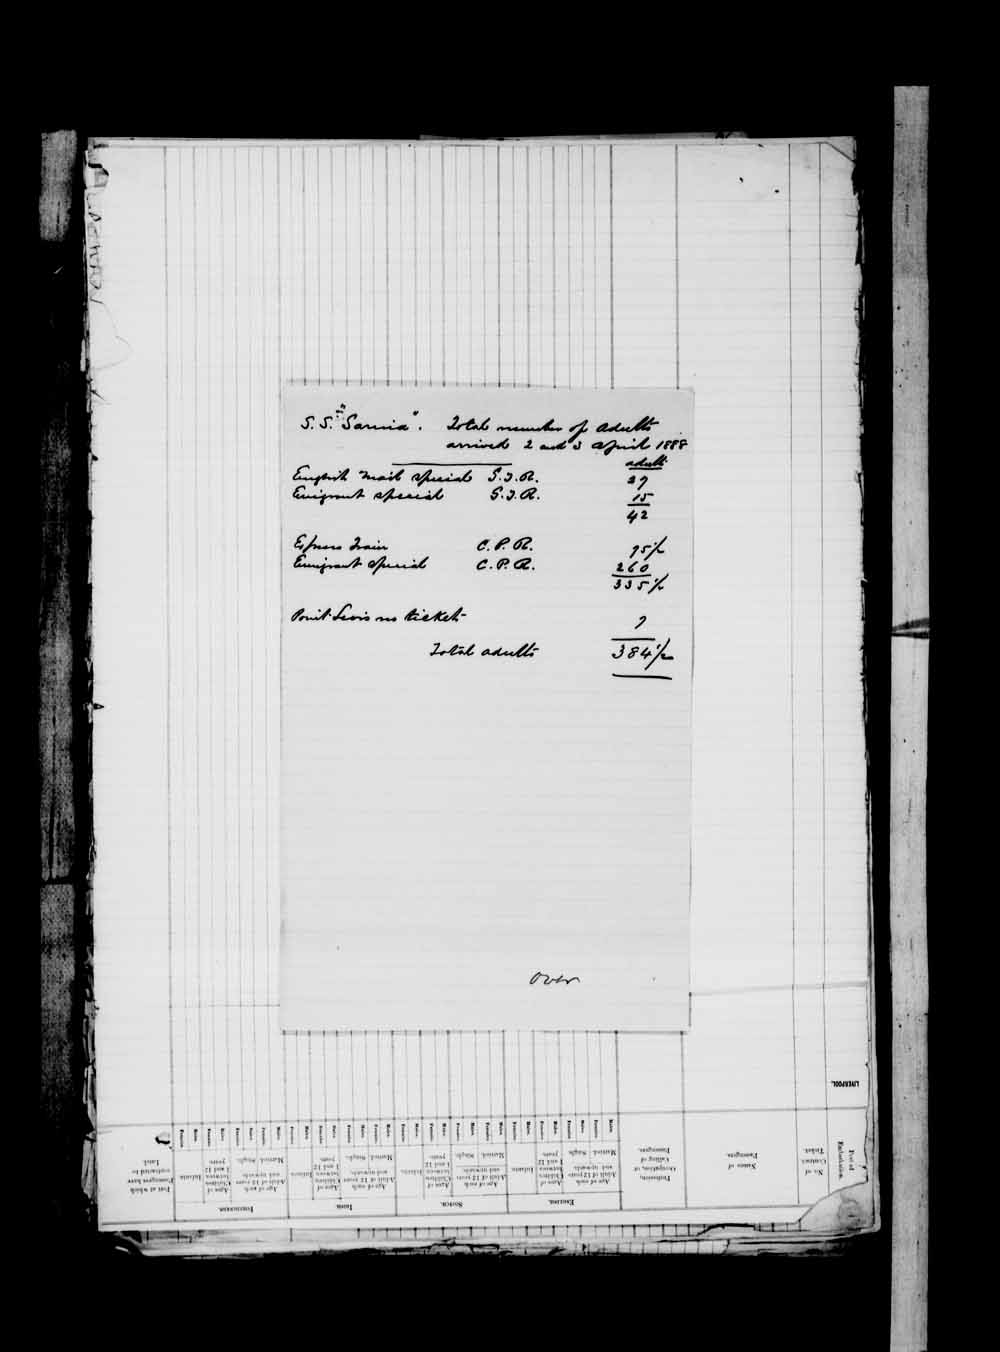 Digitized page of Passenger Lists for Image No.: e003674503